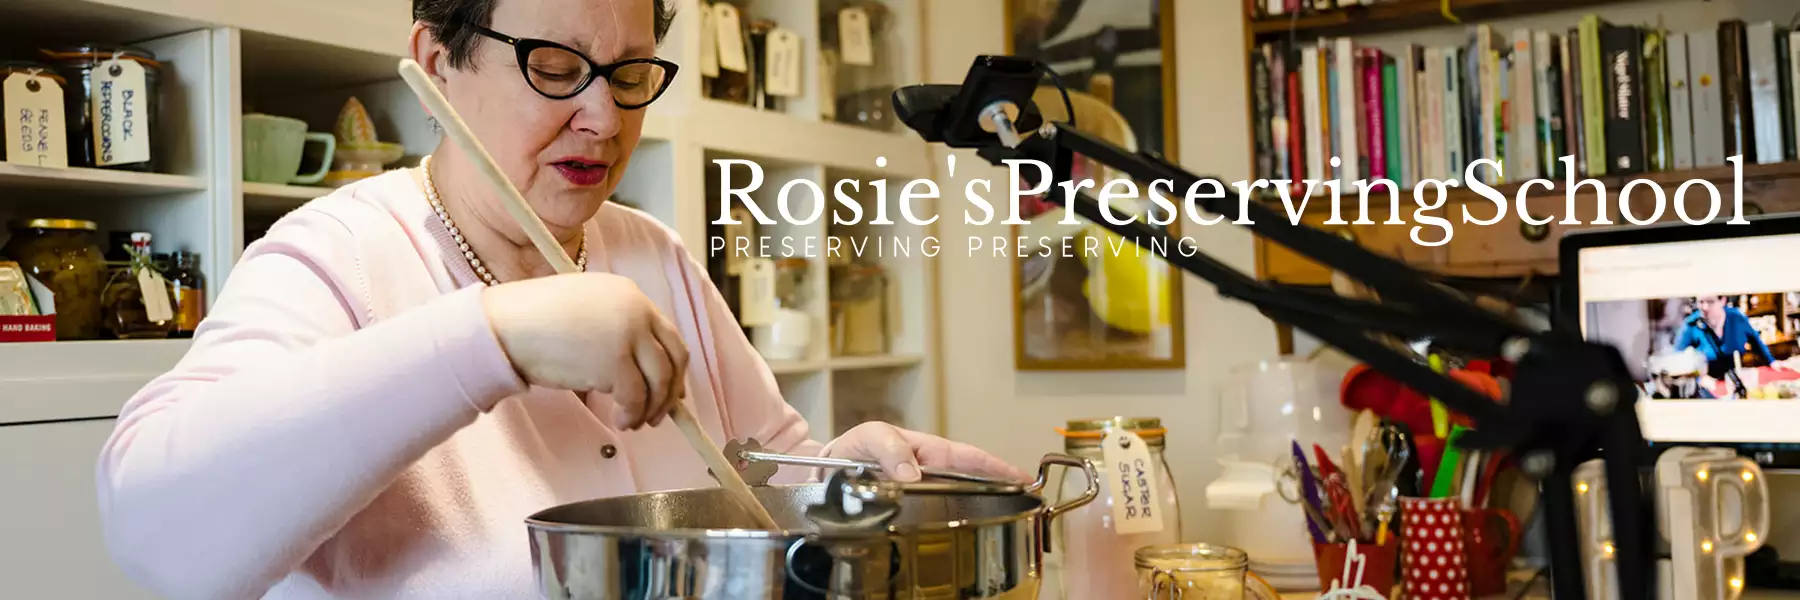 Rosie's Preserving School will support you on your journey of learning to create preserved food. Come take part in our pressure canning workshops today 